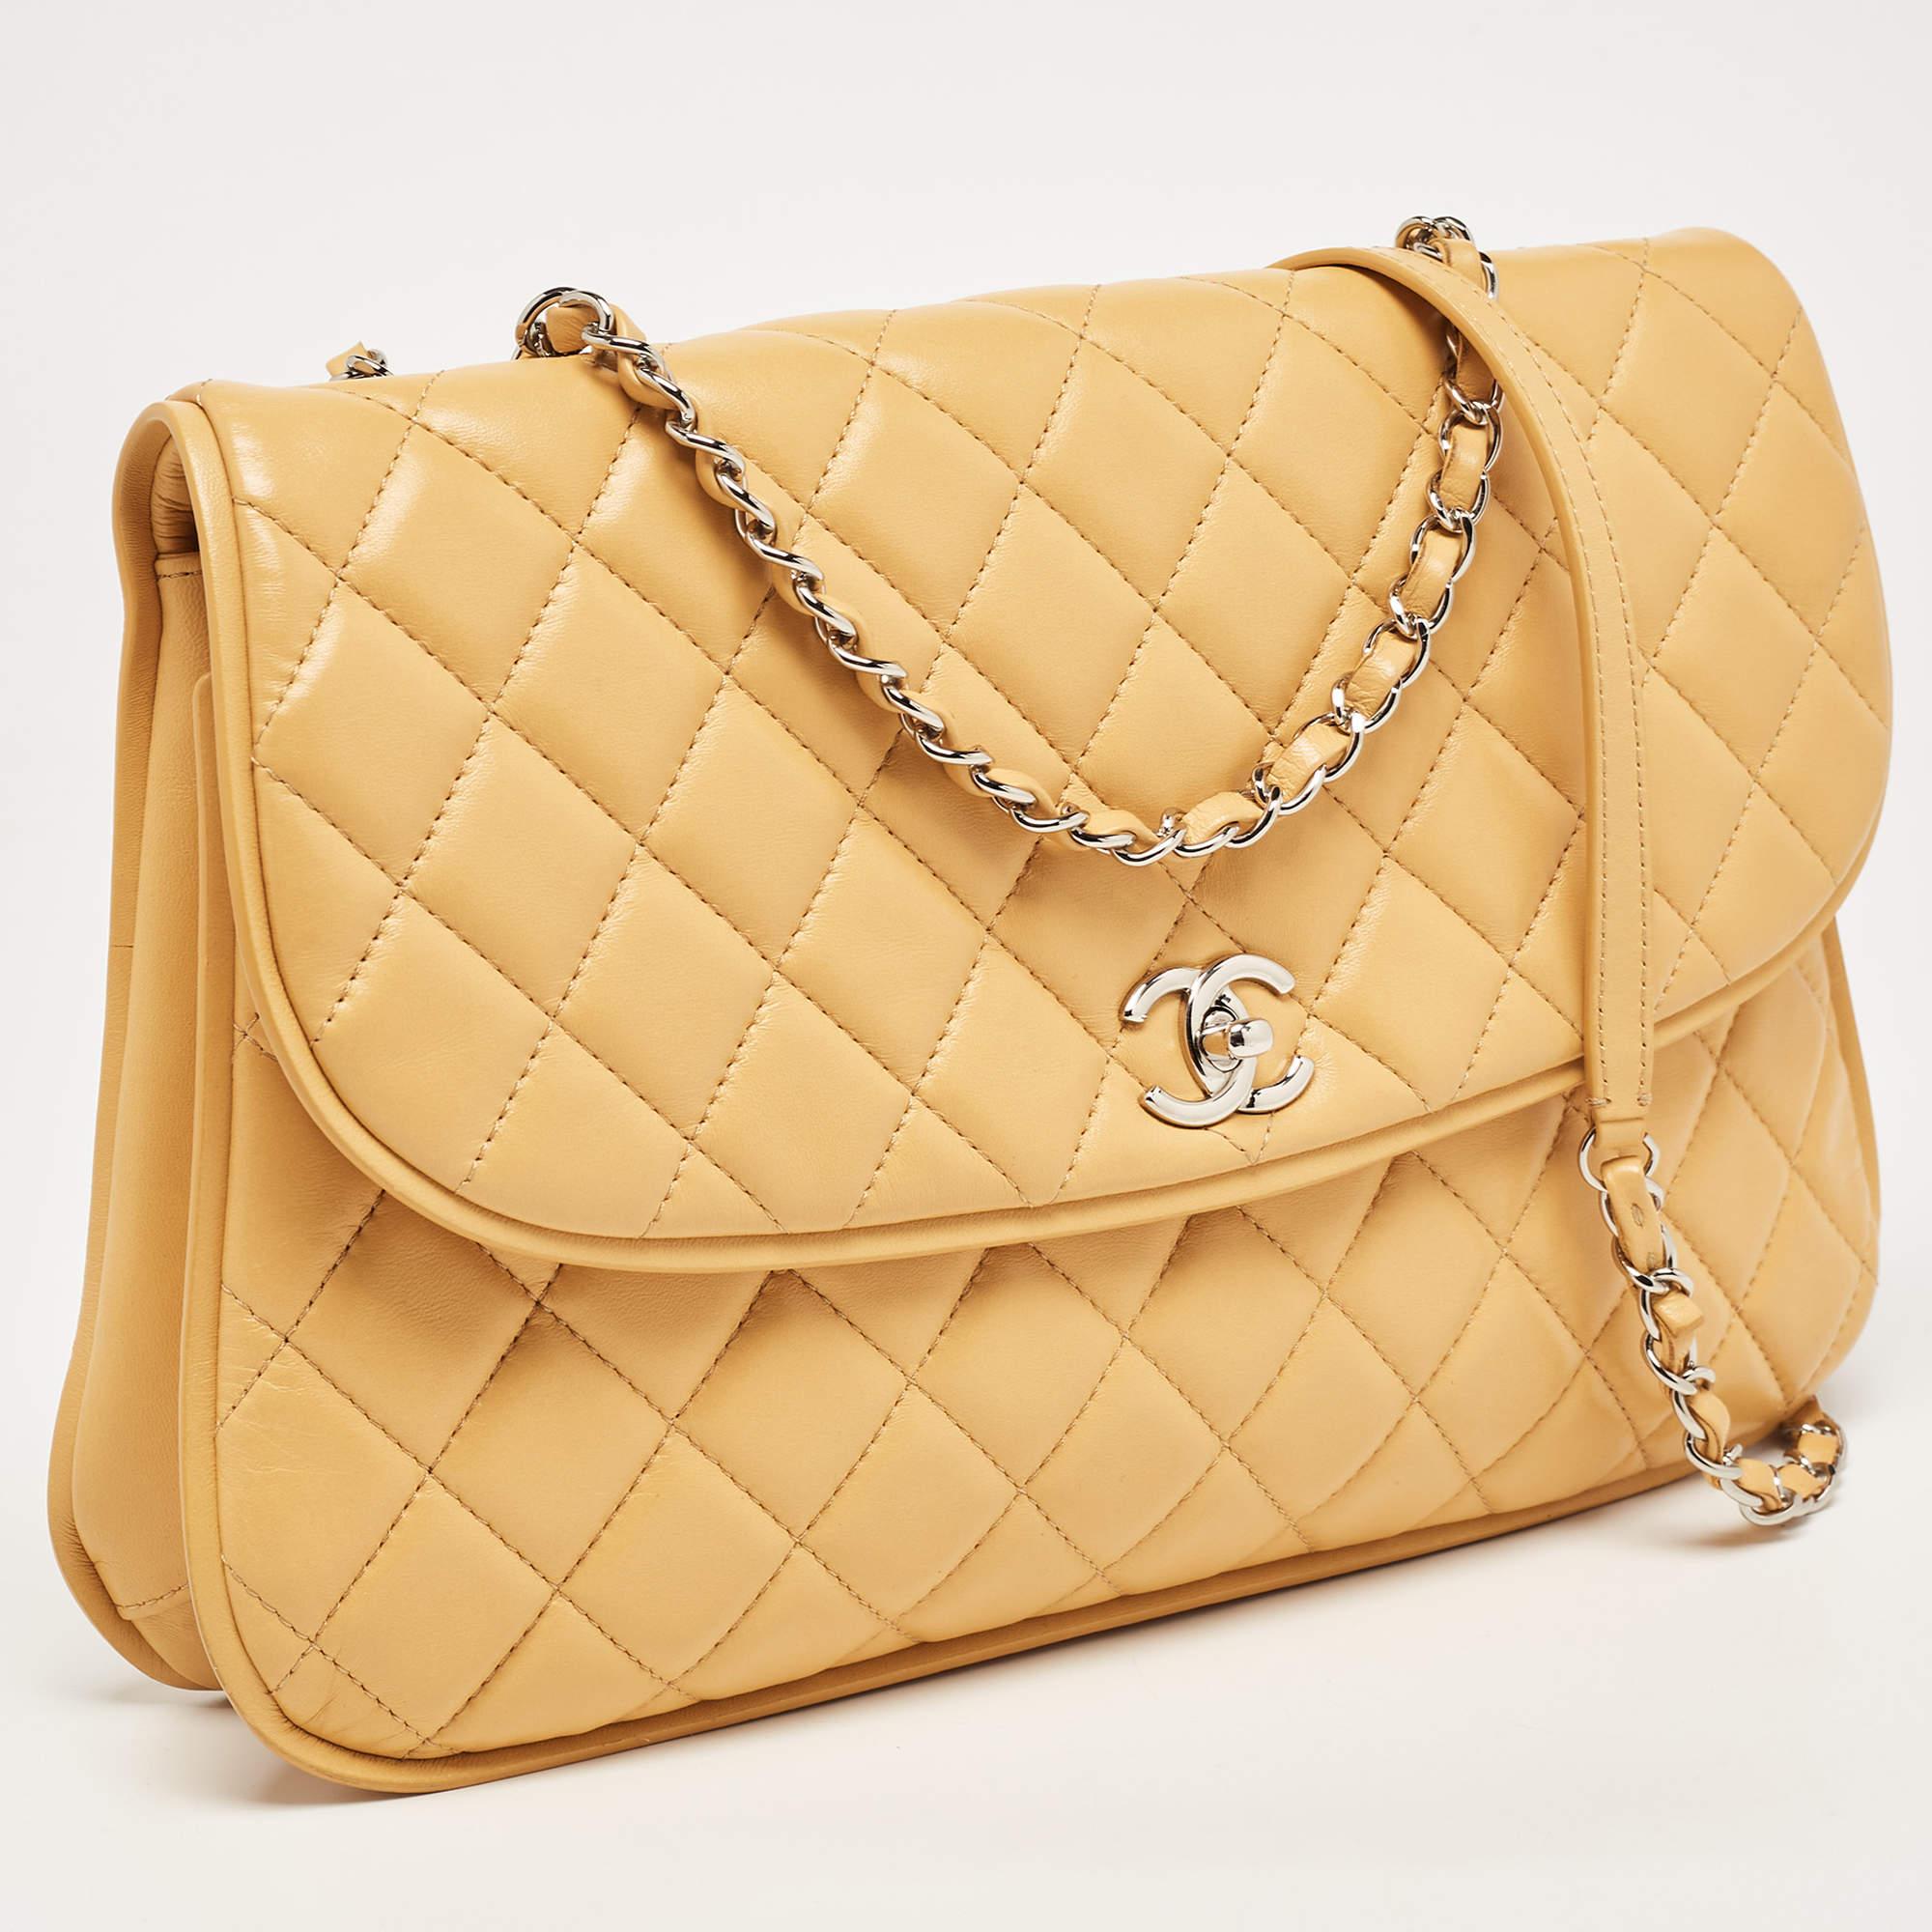 Chanel Yellow Quilted Leather Large Pagode Piping Flap Bag In Good Condition For Sale In Dubai, Al Qouz 2